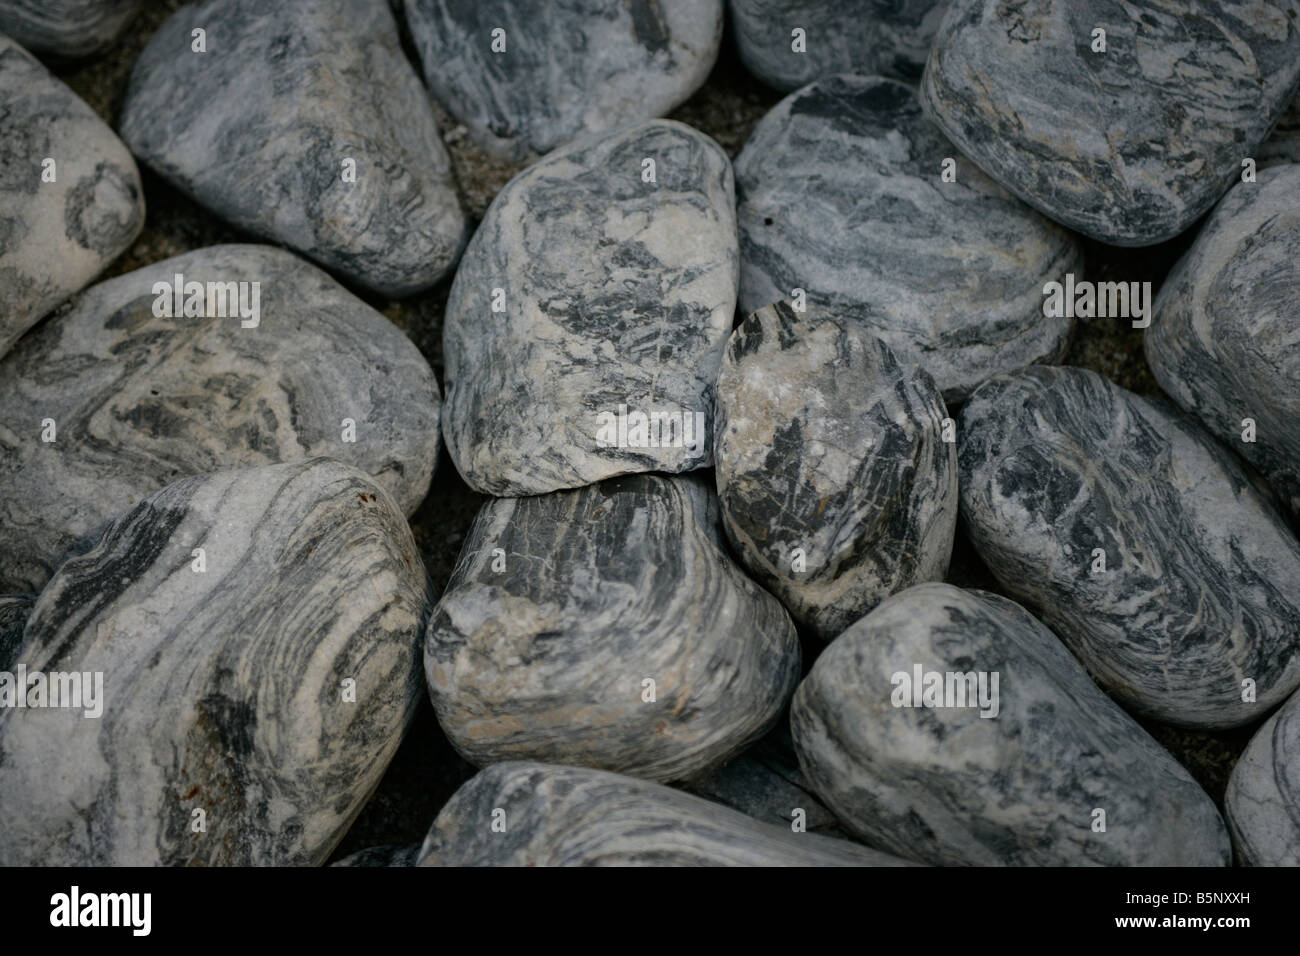 Black, Grey and white pebbles on a beach Stock Photo